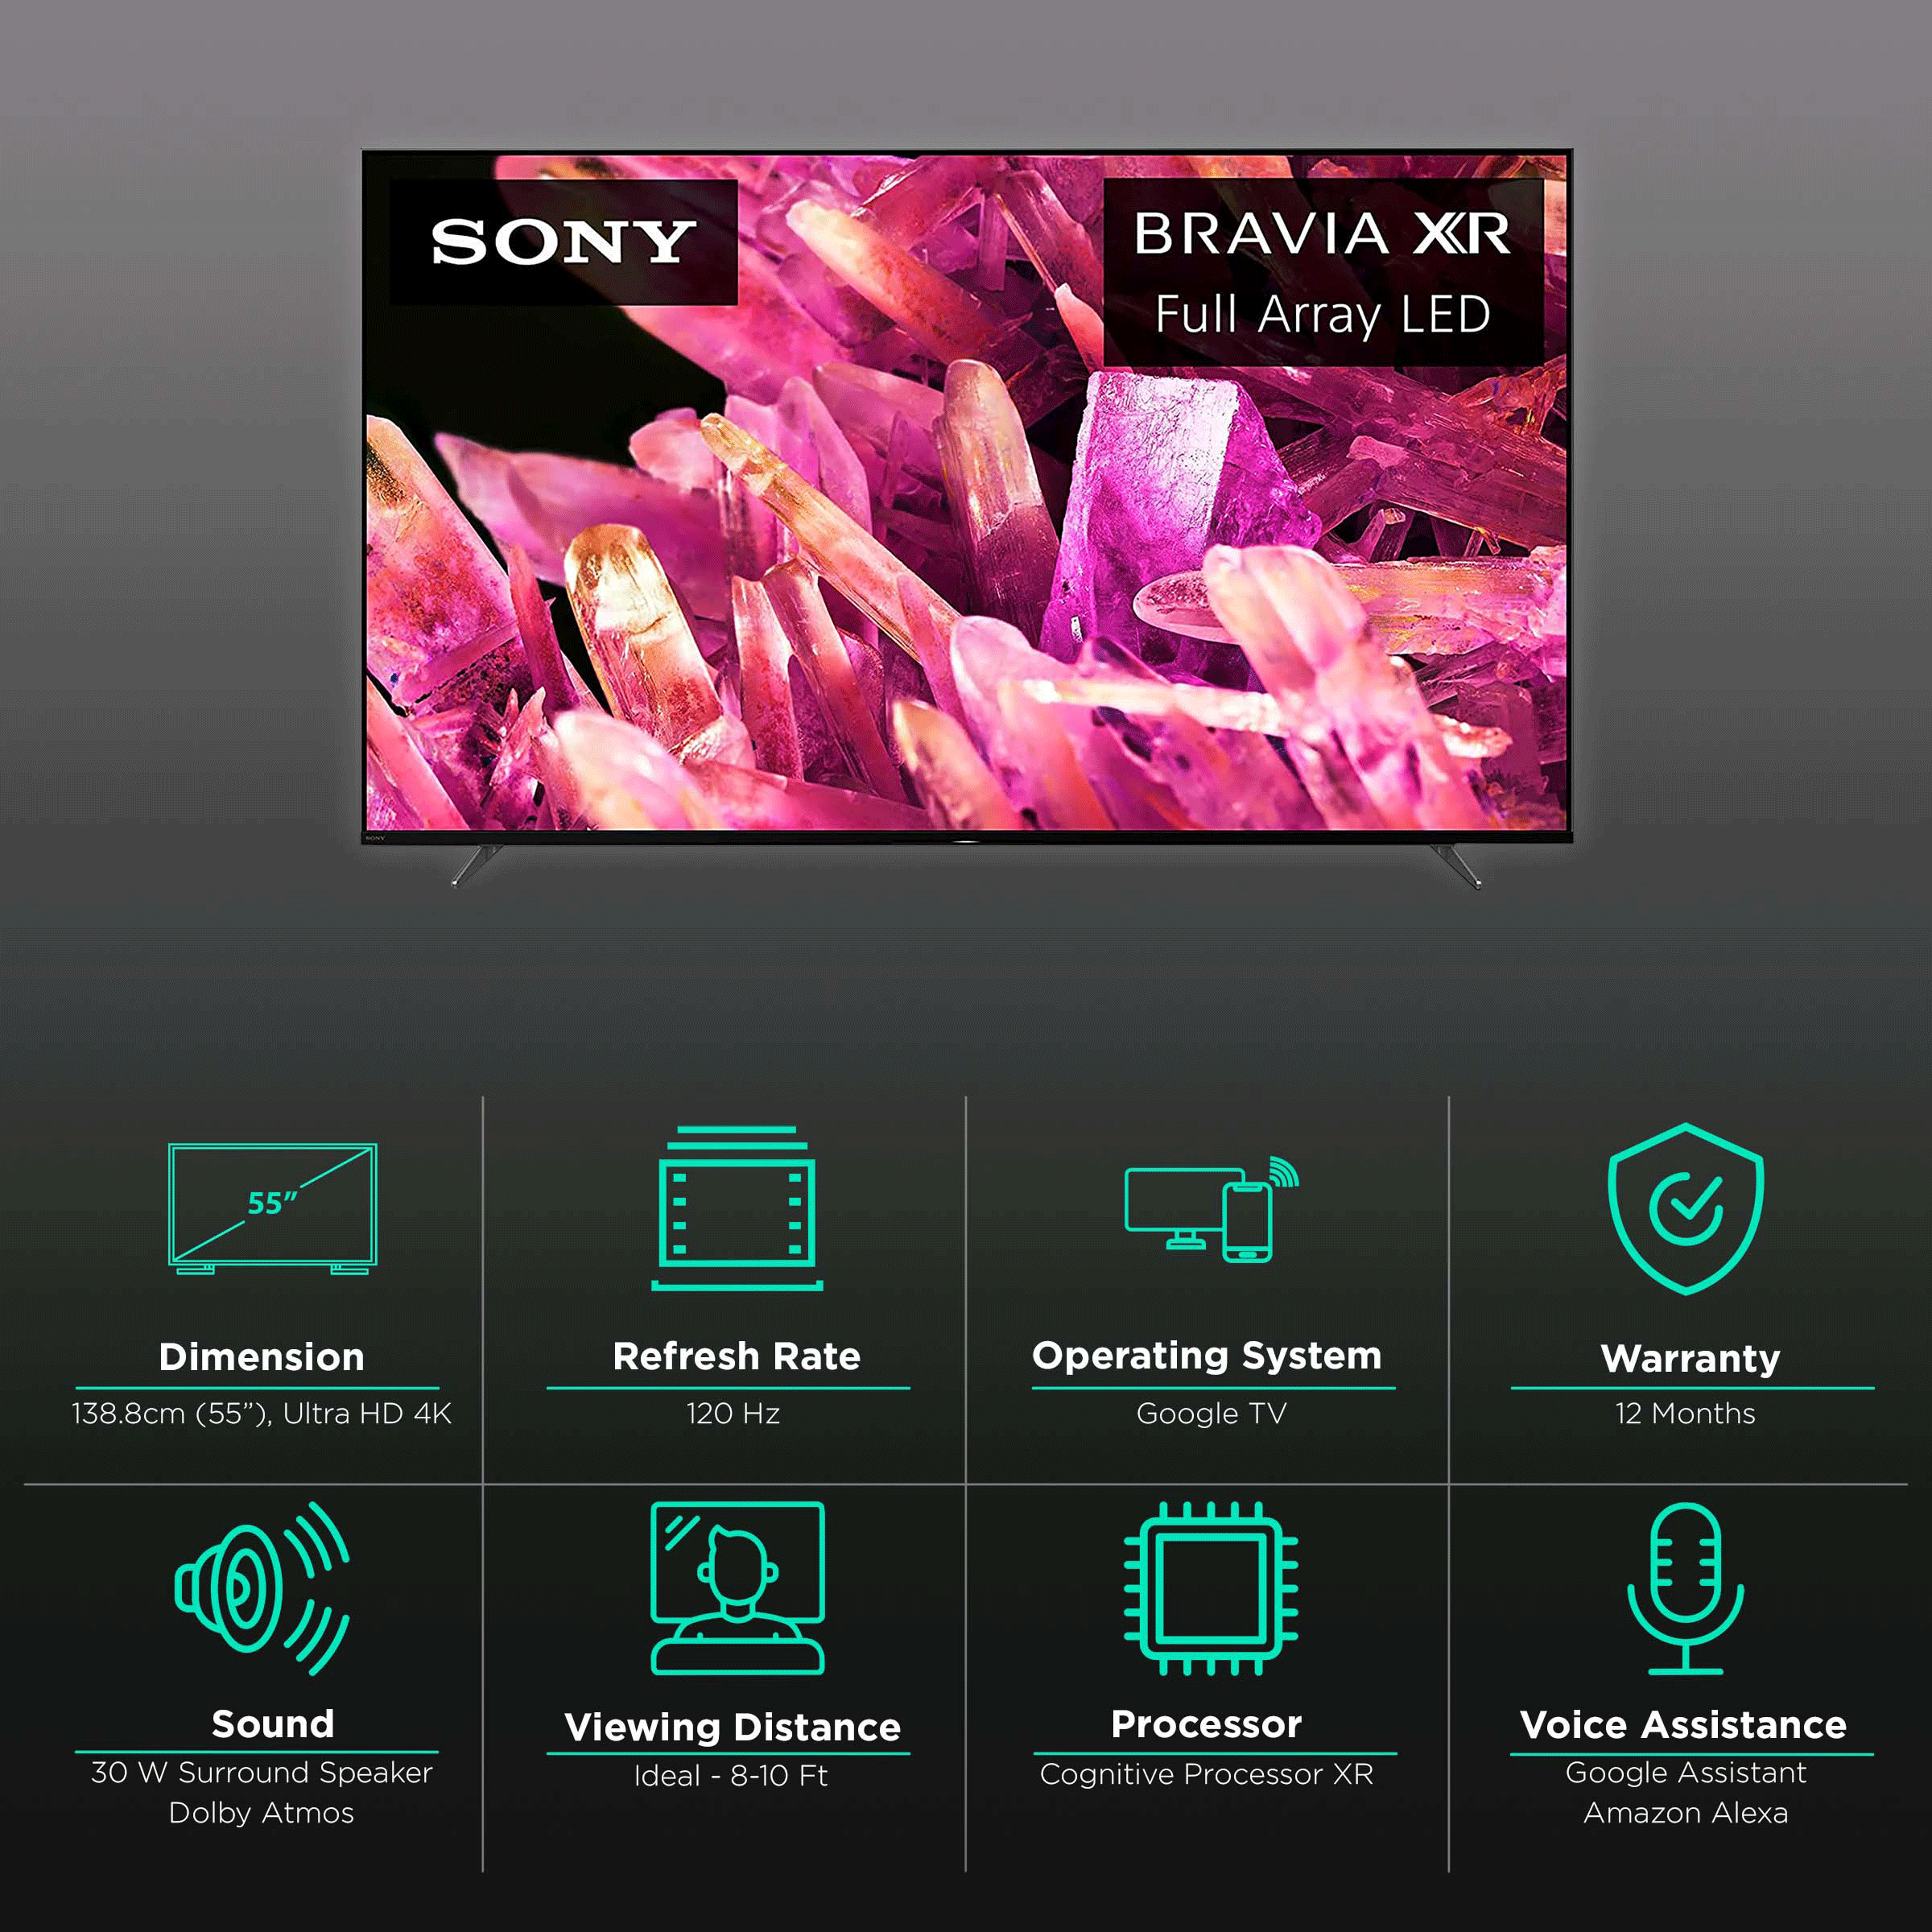 SONY 138.8cm (55 Inch) Ultra HD 4K LED Smart TV (Full Array LED with XR Contrast Booster and Dolby Atmos, XR-55X90K, Black)_3